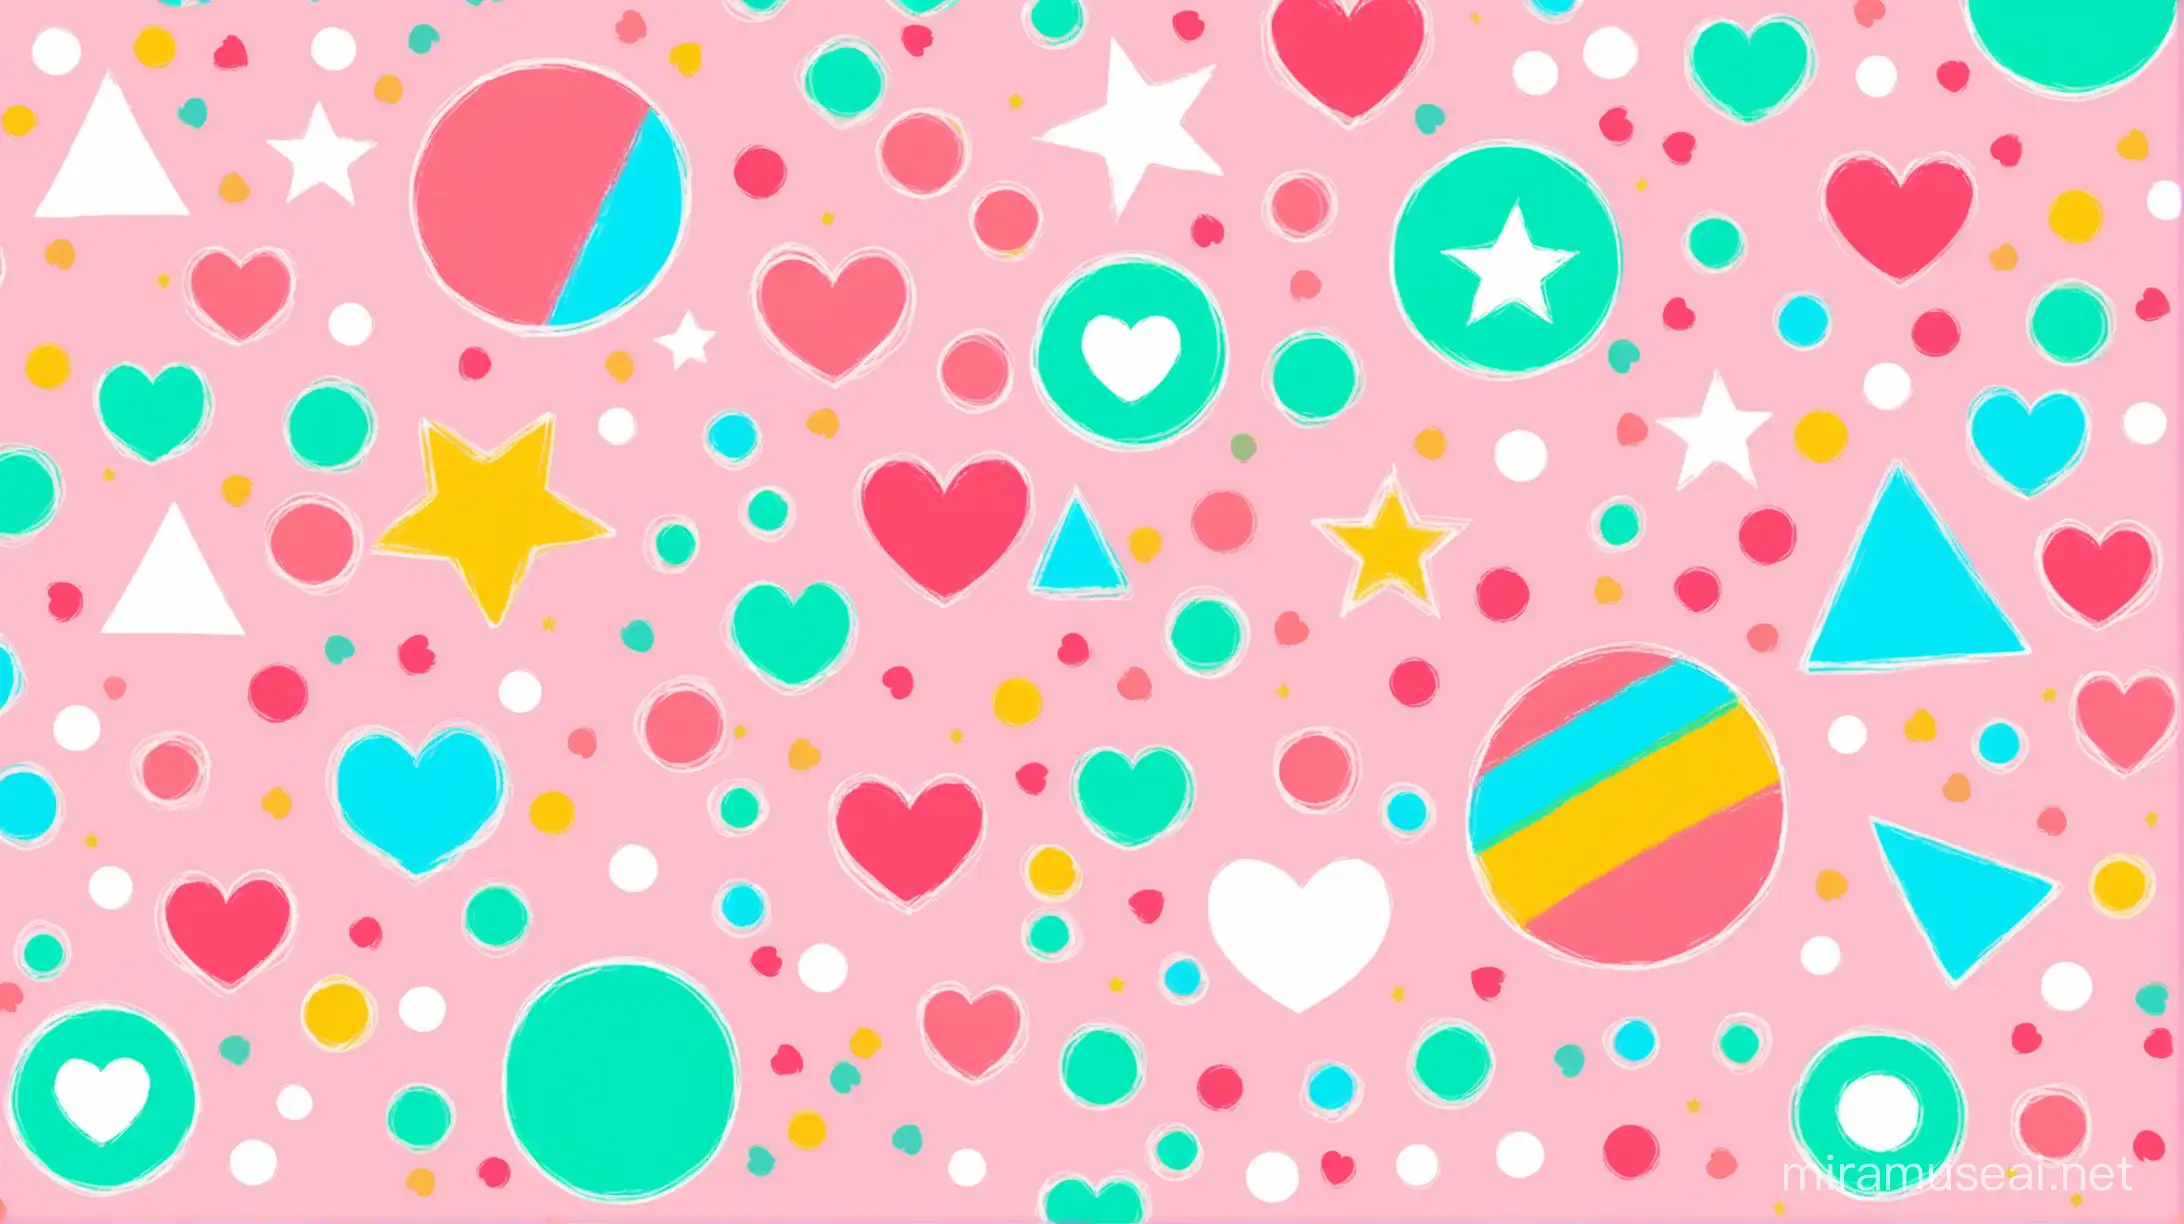 Abstract PastelColored Patterns HighQuality 2K Artwork Featuring Circles Stars Hearts Squares and Triangles